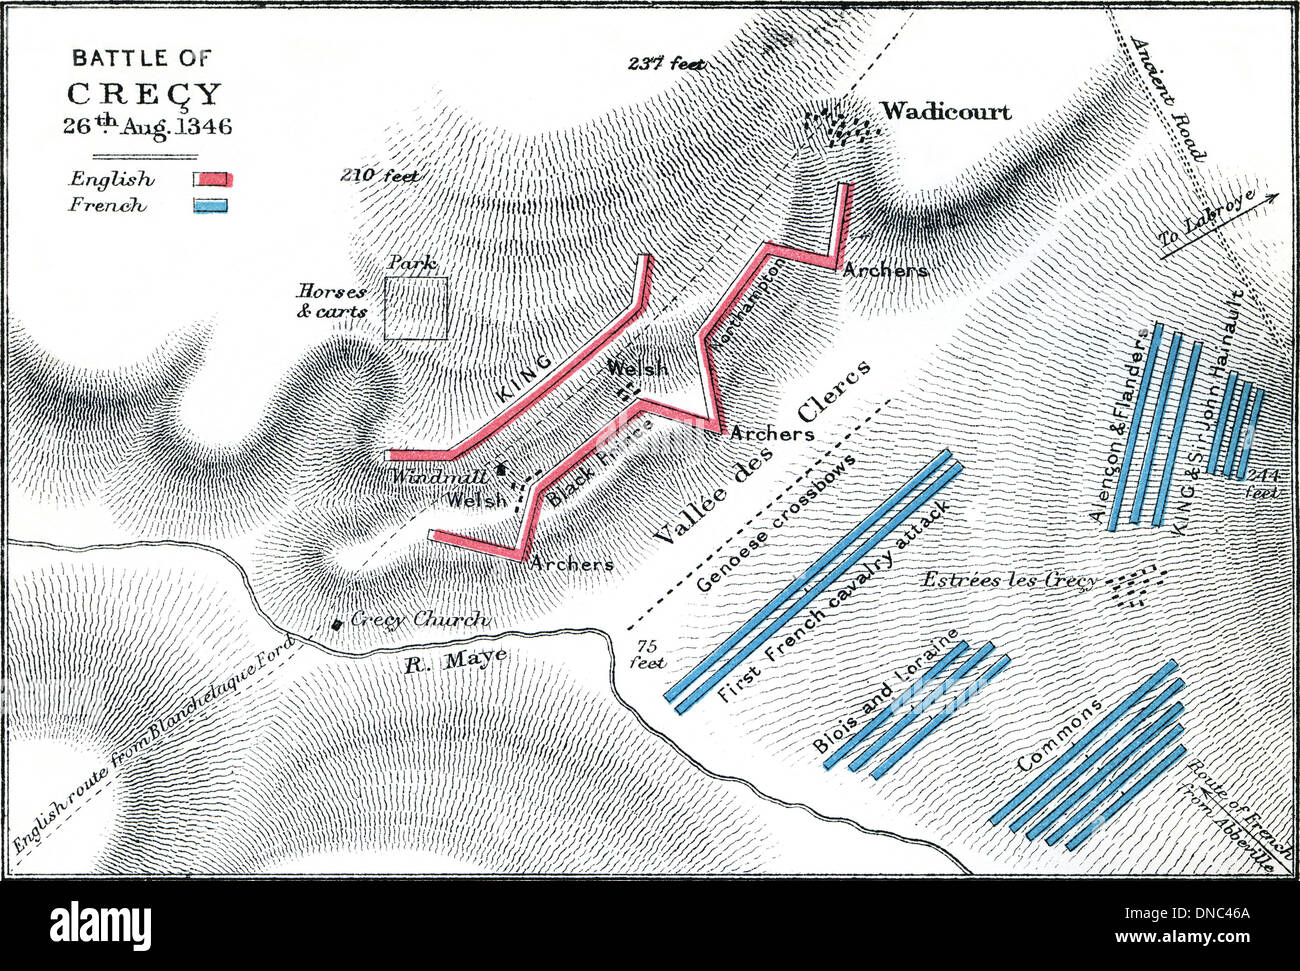 Battle of Crecy, 26th August 1346. Map of battle plan. Published 1899. Stock Photo